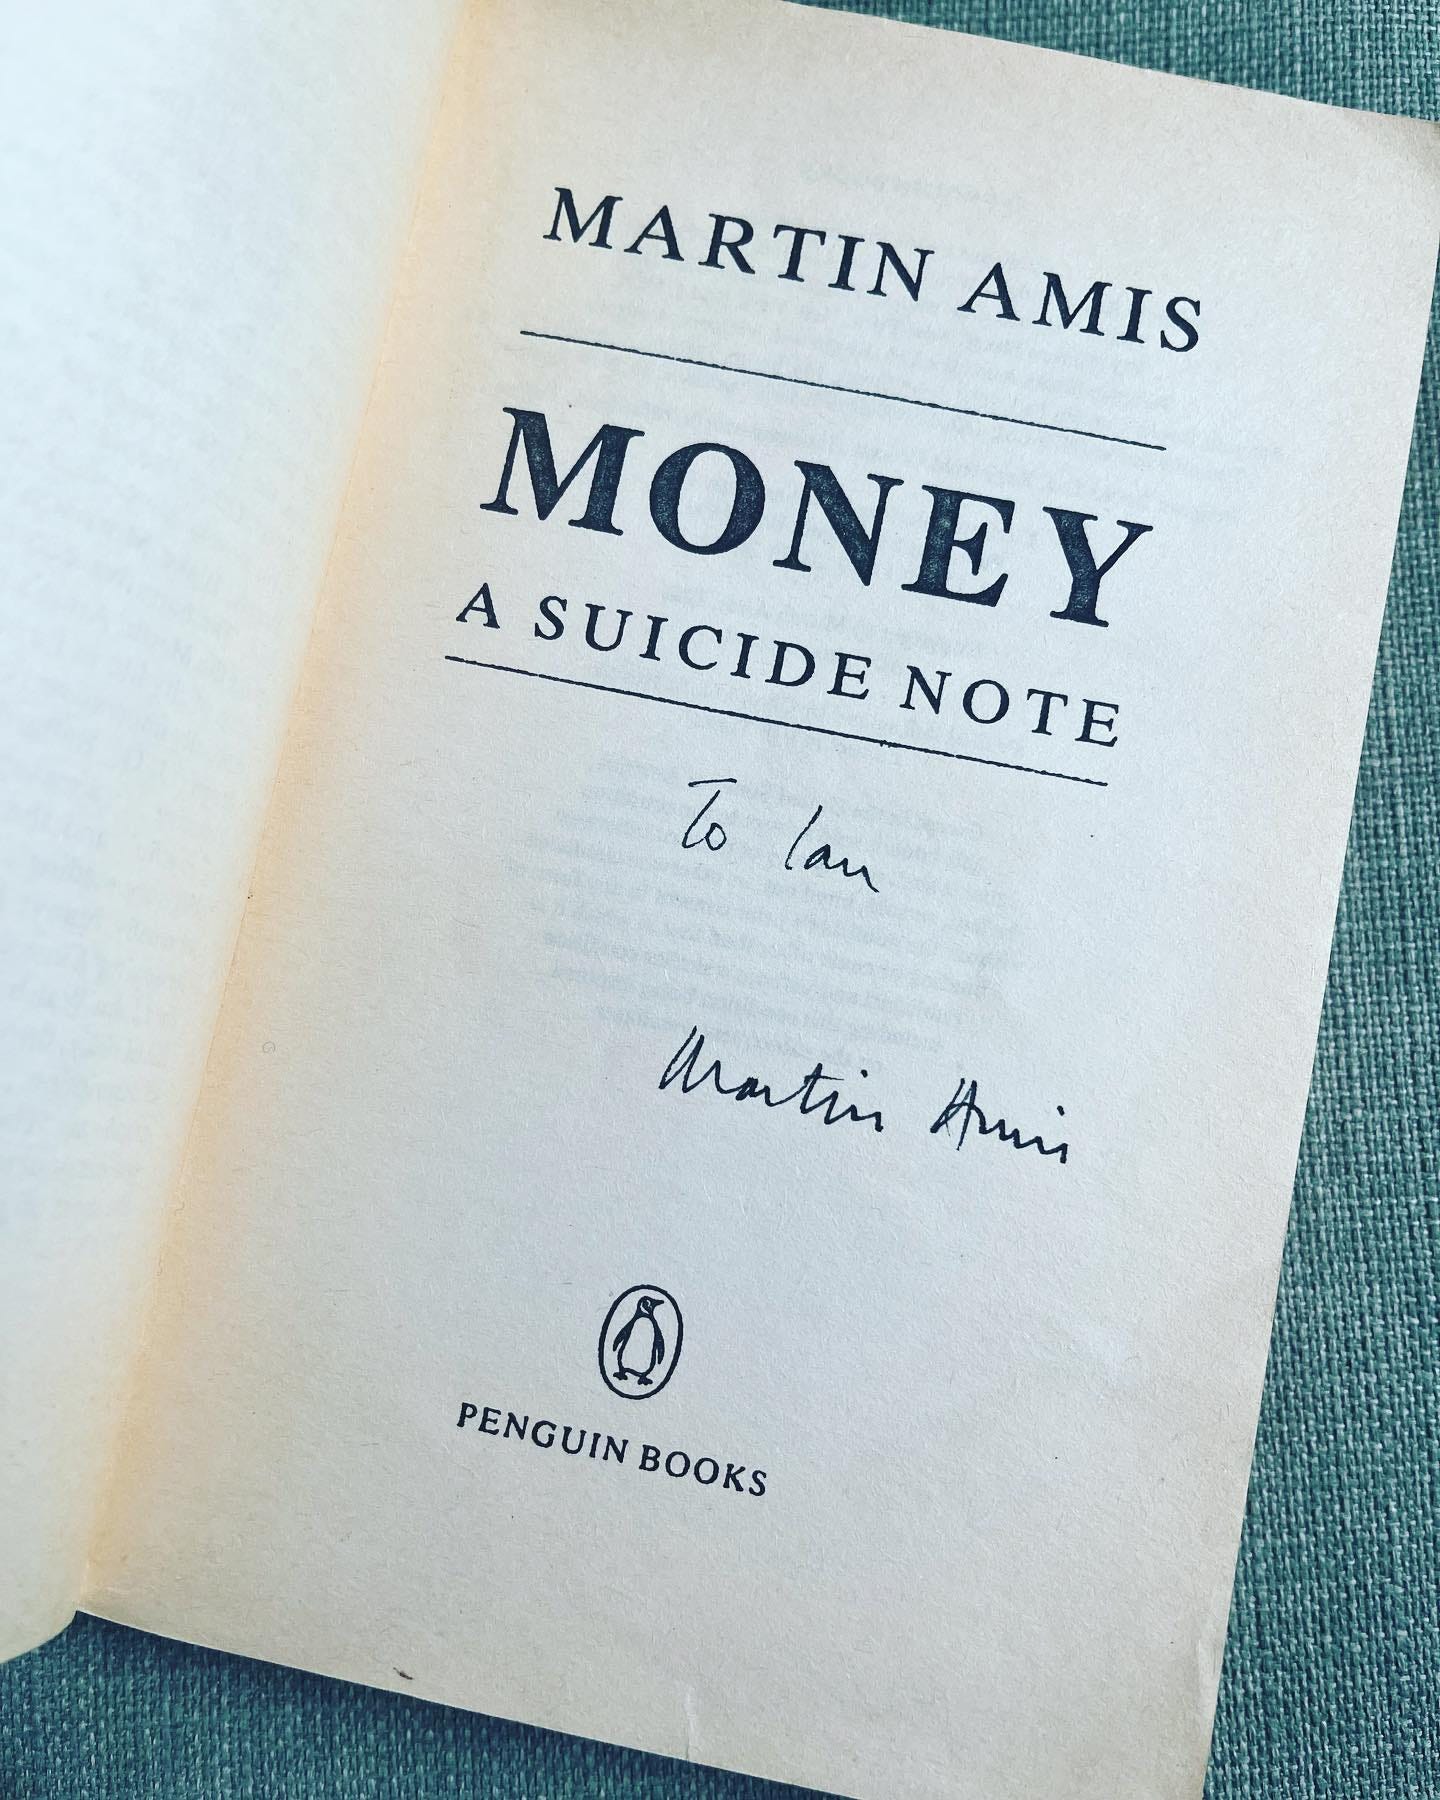 May be an image of money and text that says "MARTIN AMIS MONEY A SUICIDE NOTE To lan Matin Auni PENGUIN BOOKS"